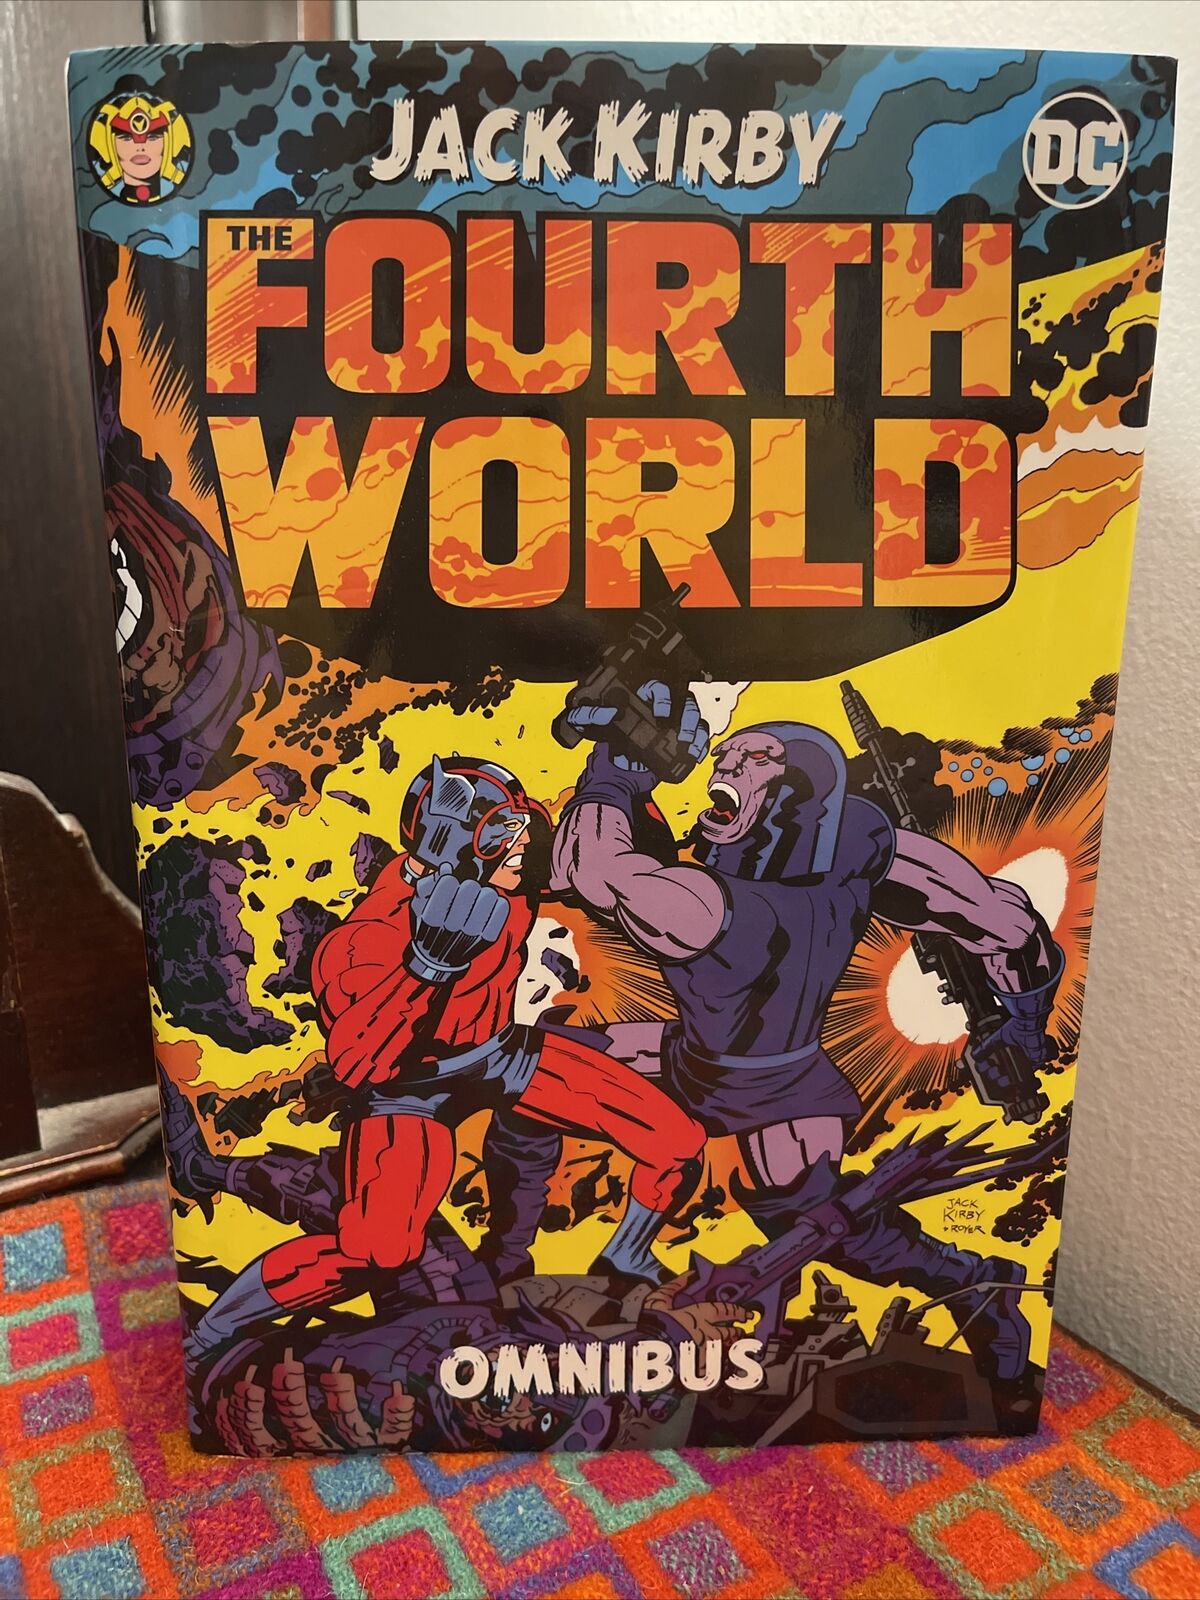 JACK KIRBY THE FOURTH WORLD OMNIBUS DC COMICS HC MISTER MIRACLE NEW GODS ORION